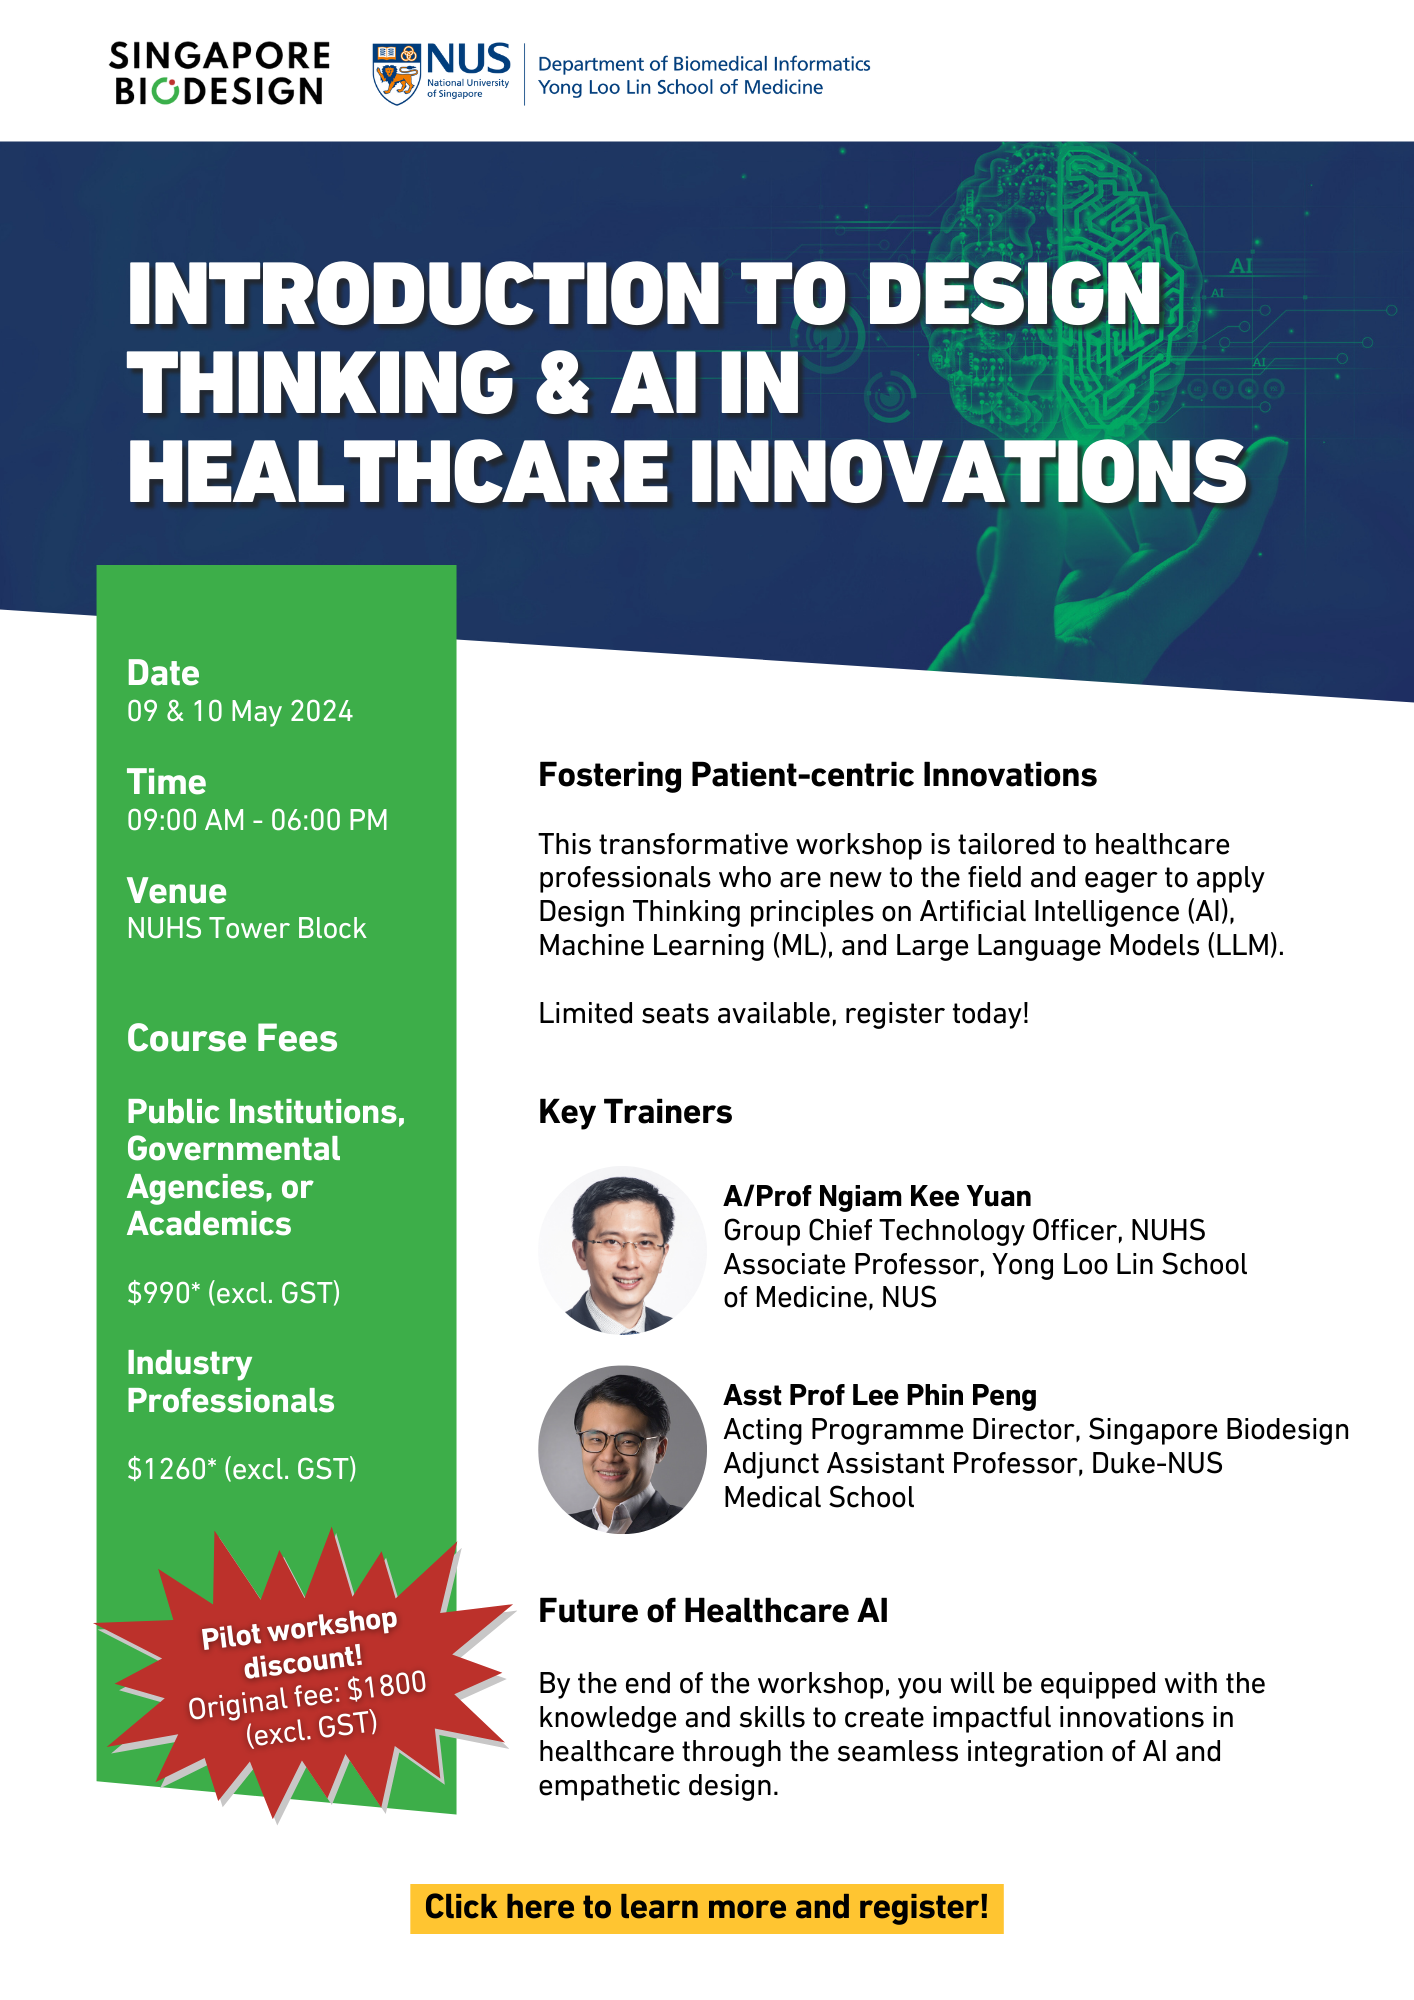 Introduction to Design Thinking & AI in Healthcare Innovations (11)